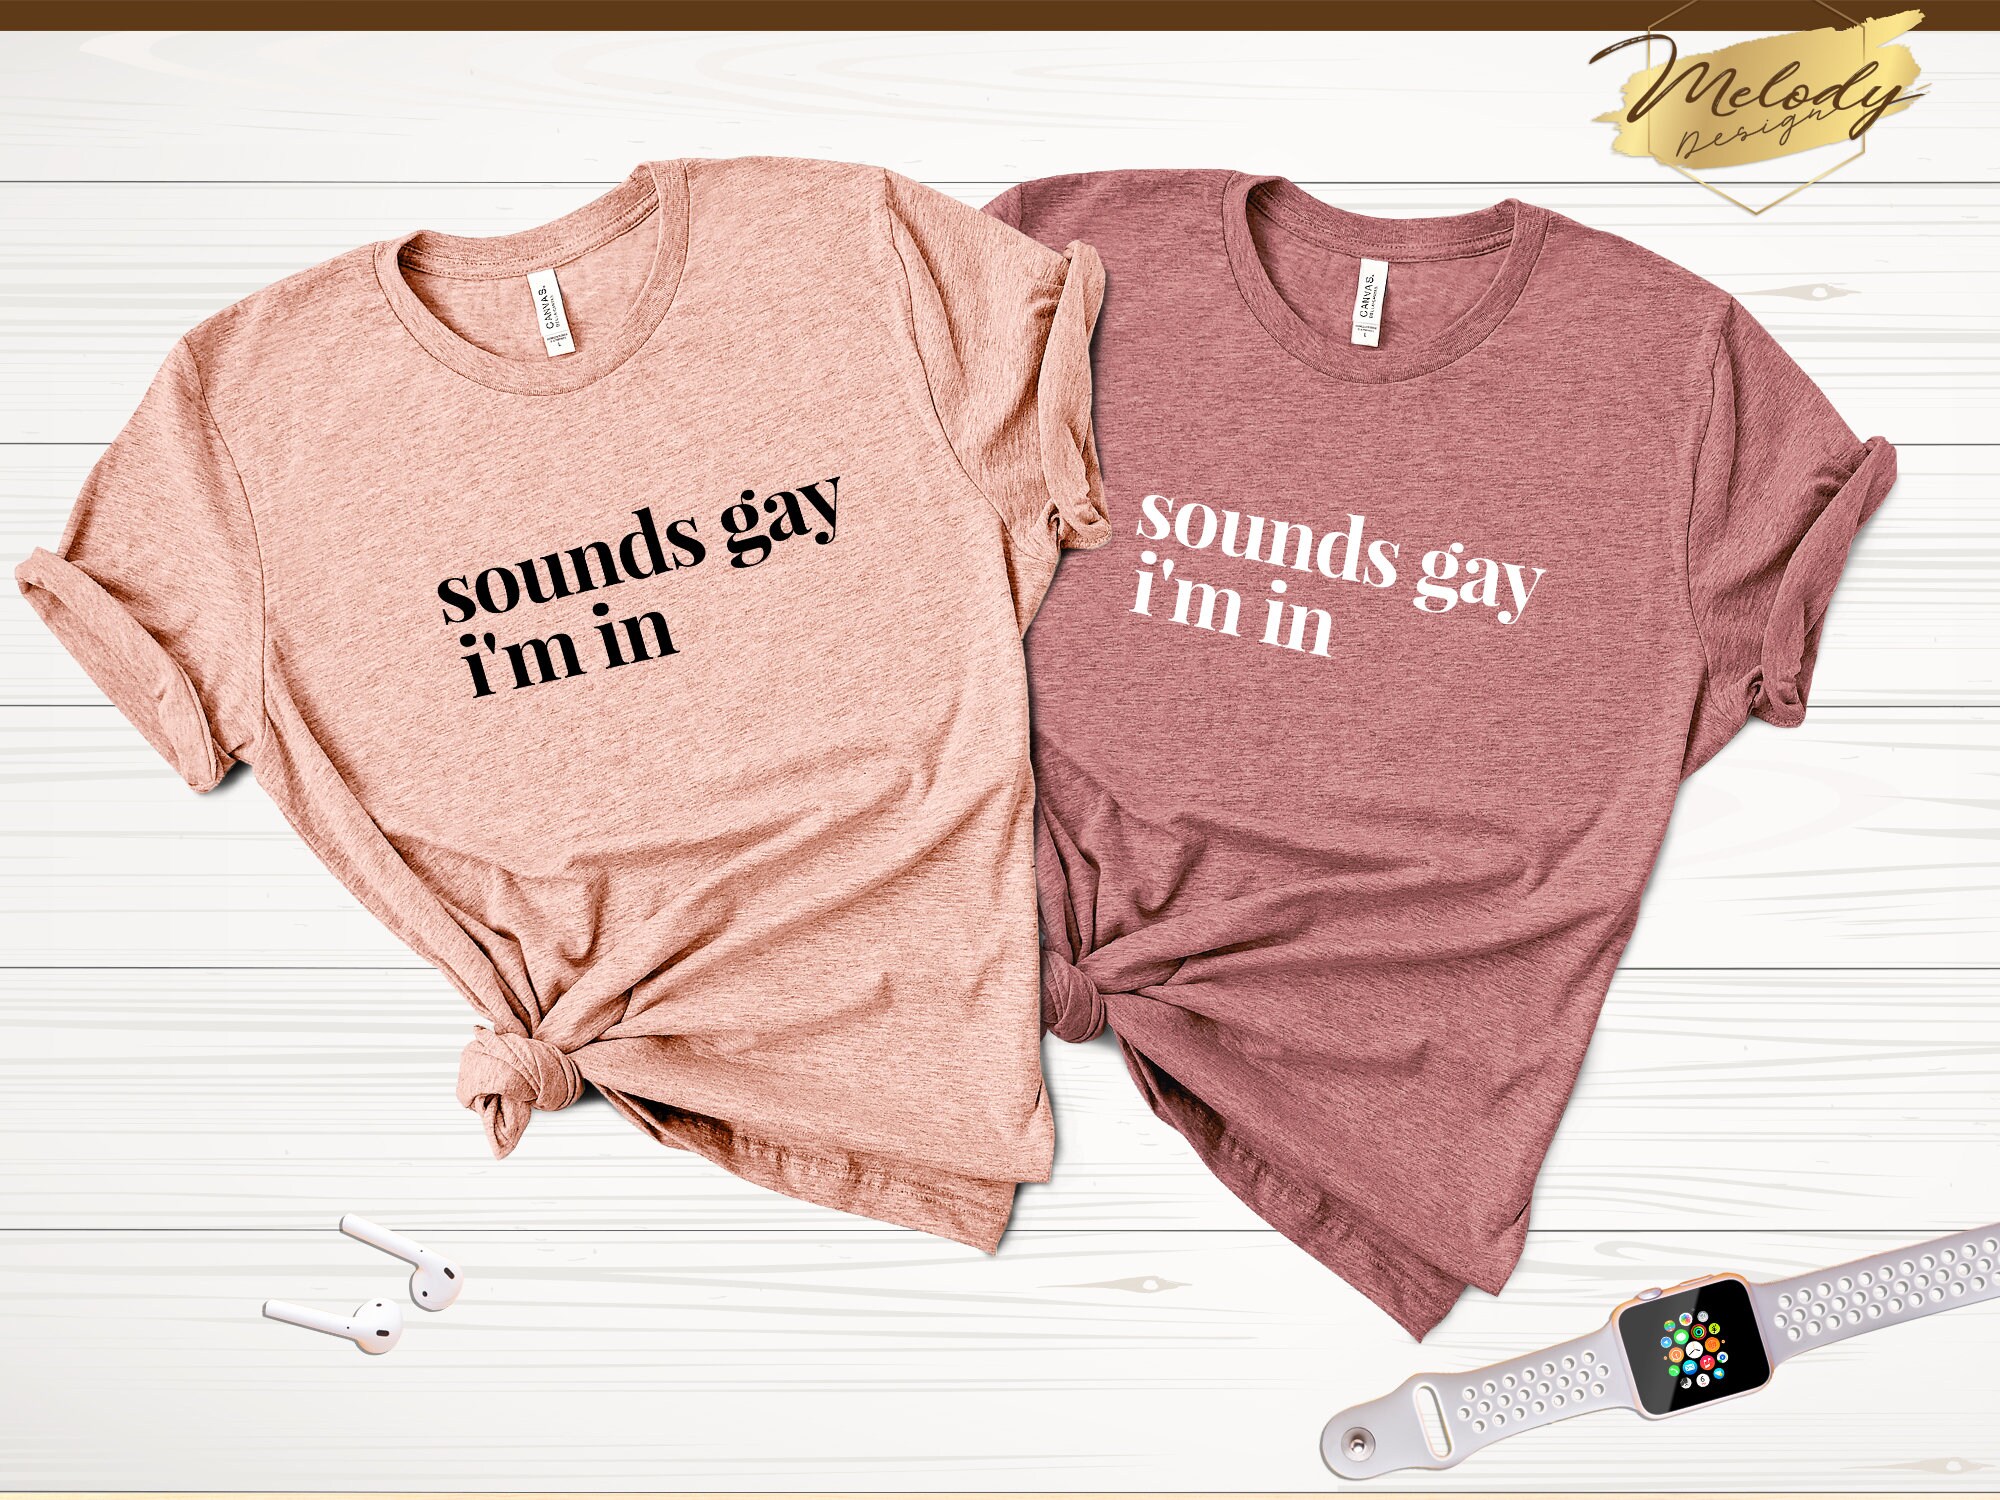 Discover Sounds Gay I'm In shirt, lgbt shirt, pride shirt, gay pride, lesbian shirt, gay shirt, transexual shirt, bisexual shirt, funny gay shirt